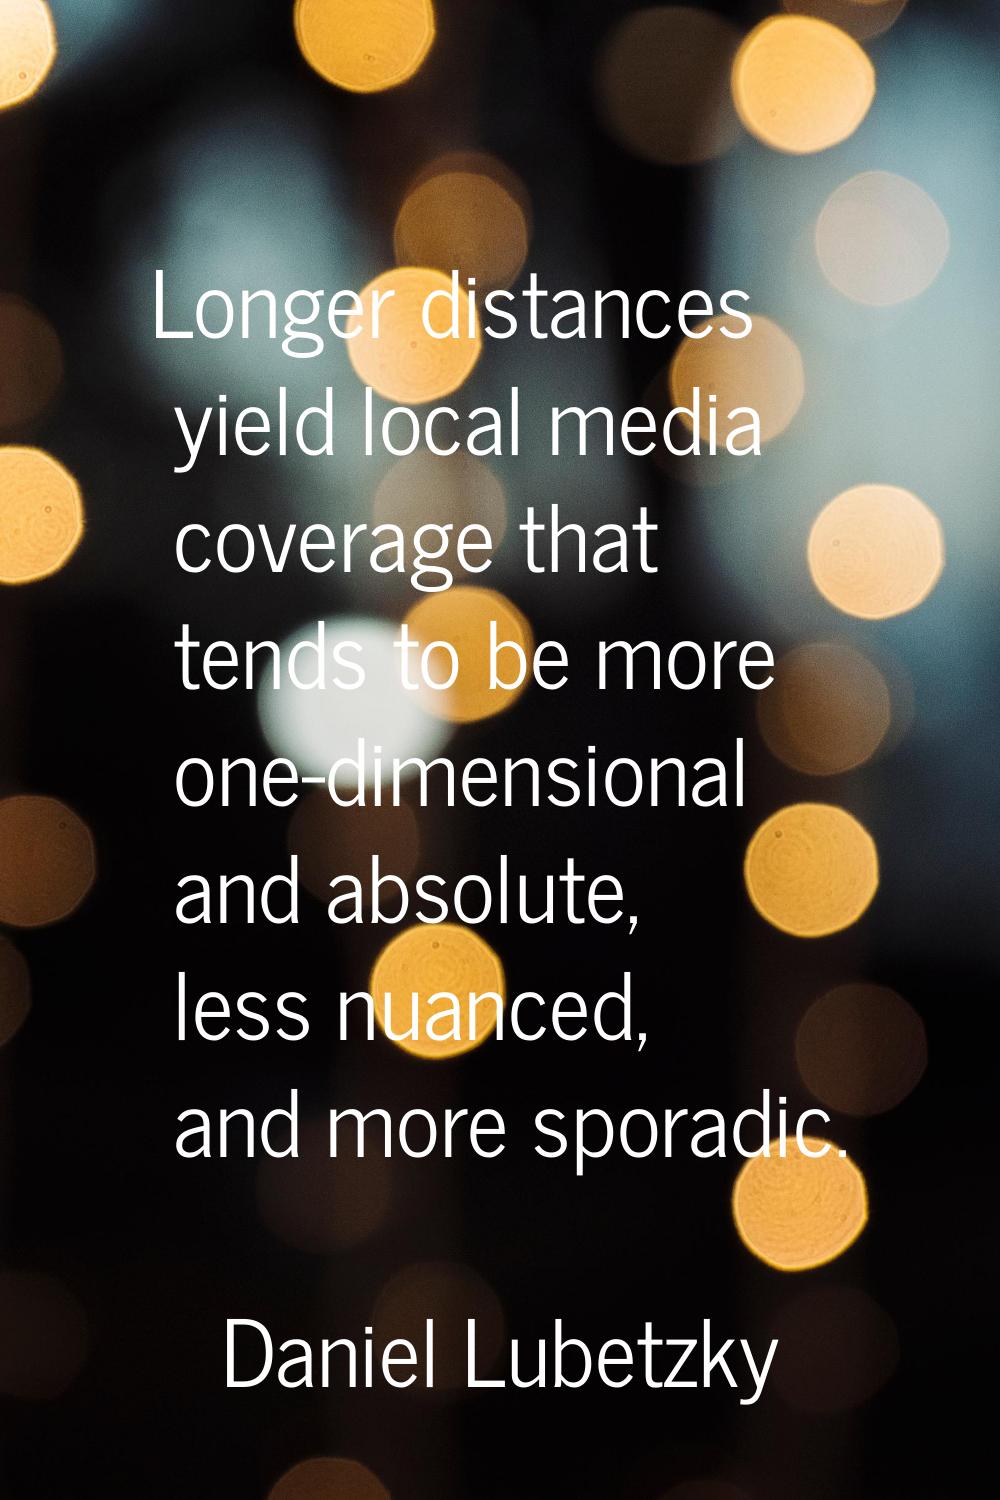 Longer distances yield local media coverage that tends to be more one-dimensional and absolute, les